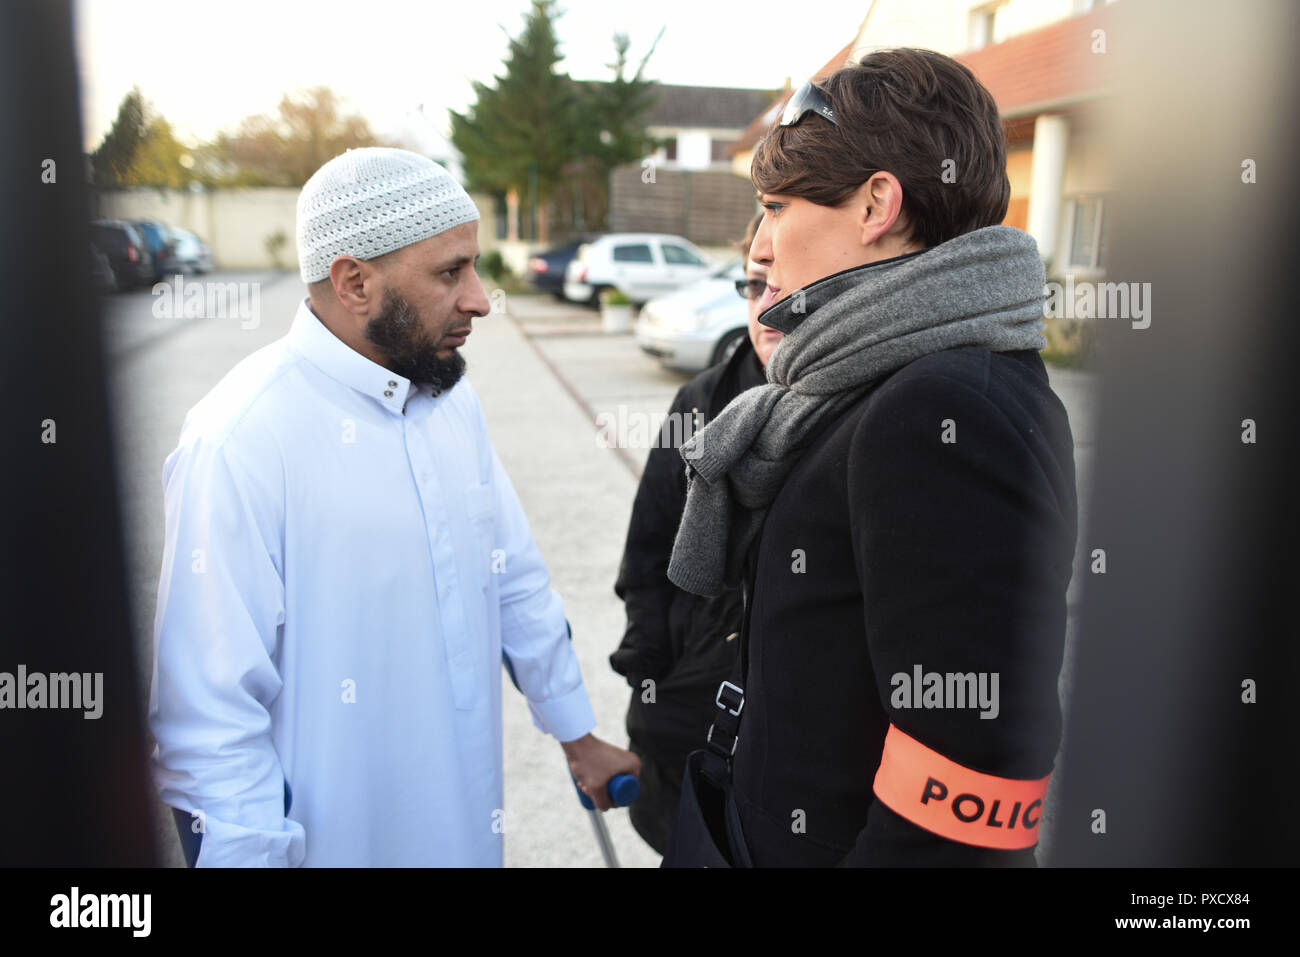 November 15, 2015 - Paris, France: The president of the Luce mosque, Abdallah Benali, talks to a police woman and asks for police protection after his mosque received threats of retaliation over the Paris terror attacks. Benali denied that French terrorist Ismail Omar Mostefai was worshipping regularly here. The mayor of Chartres earlier told that Mostefai became radicalized by attending this mosque before 2010. Des medias du monde entier affluent a la mosquee de Luce, qui a ete frequentee par  Ismail Omar Mostefai, l'un des djihadistes ayant participe a la tuerie du Bataclan. Les responsables Stock Photo